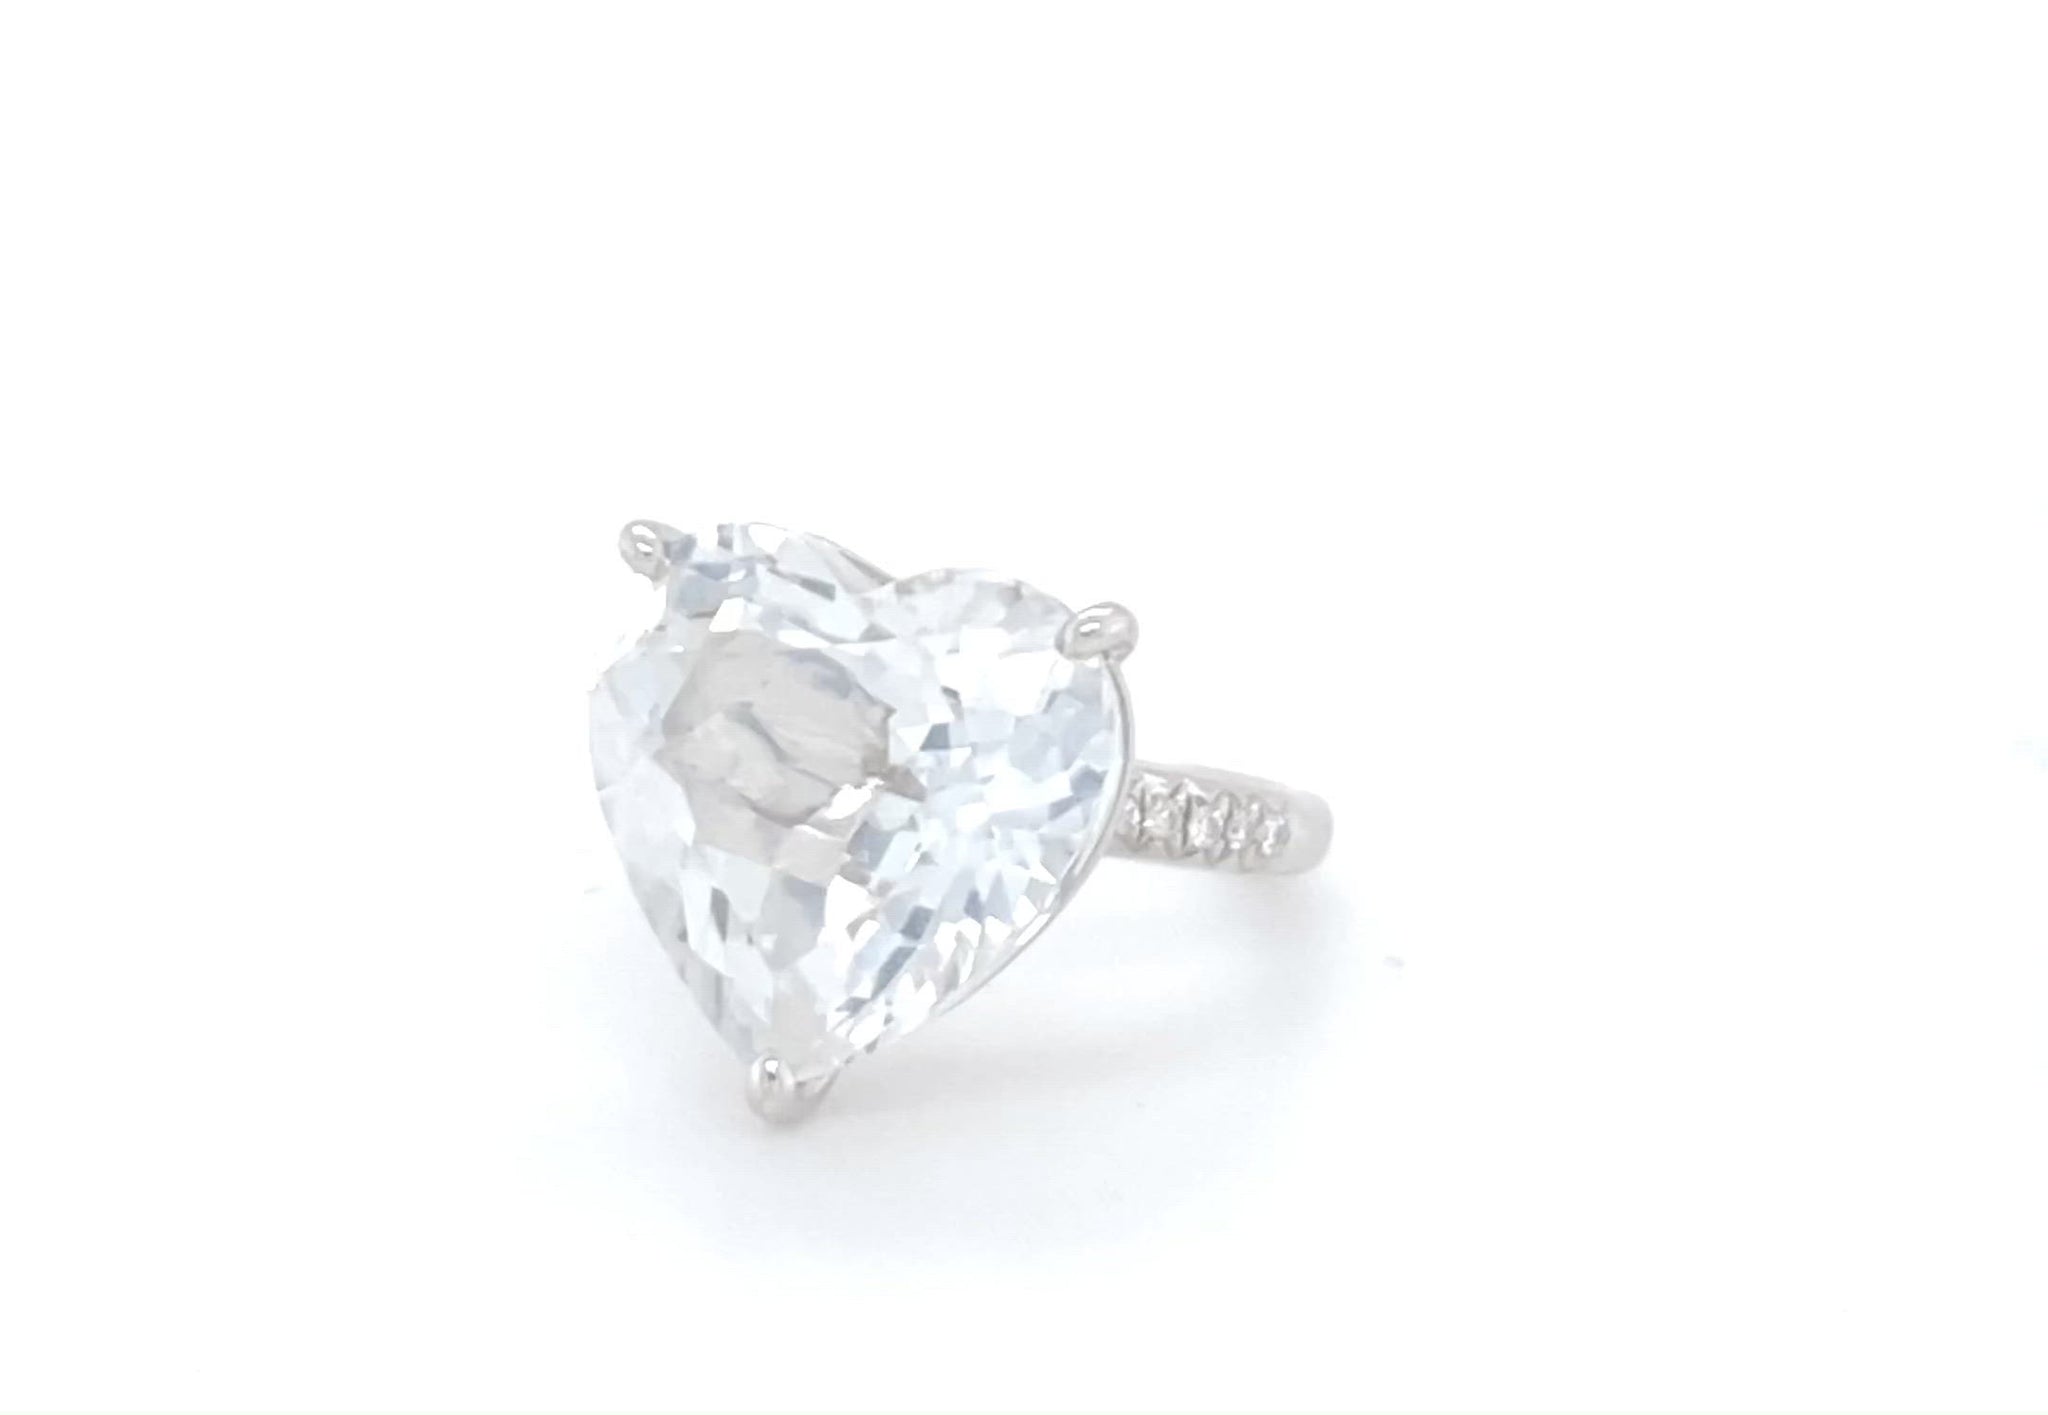 16.34 Carat Heart Shaped White Topaz Ring with .12 Carats of Diamonds